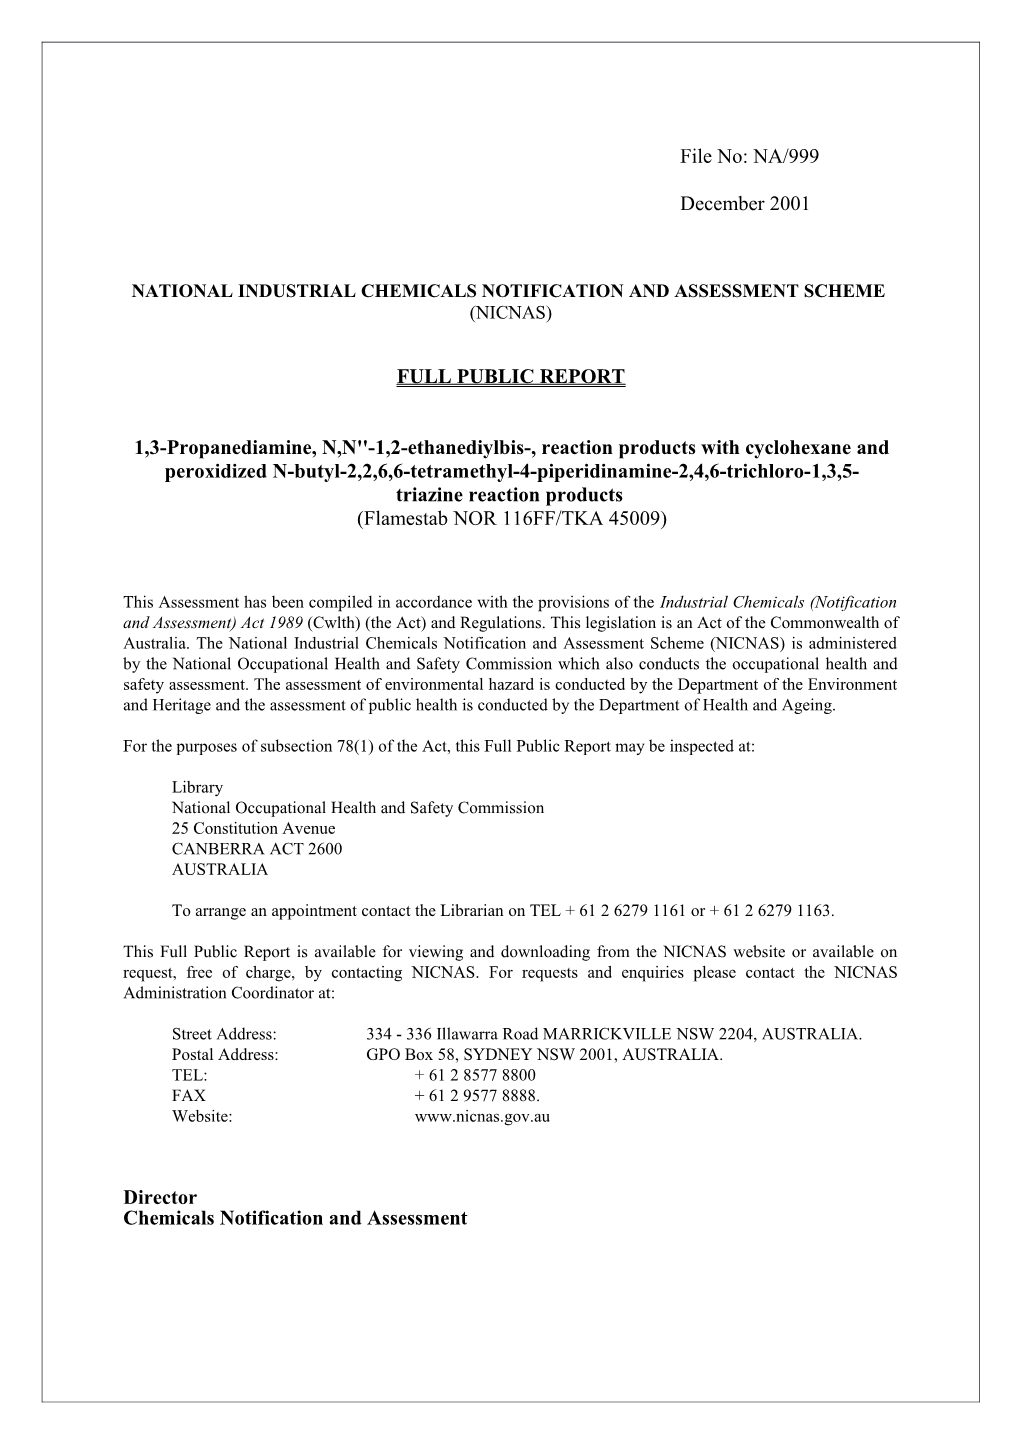 National Industrial Chemicals Notification and Assessment Scheme s4